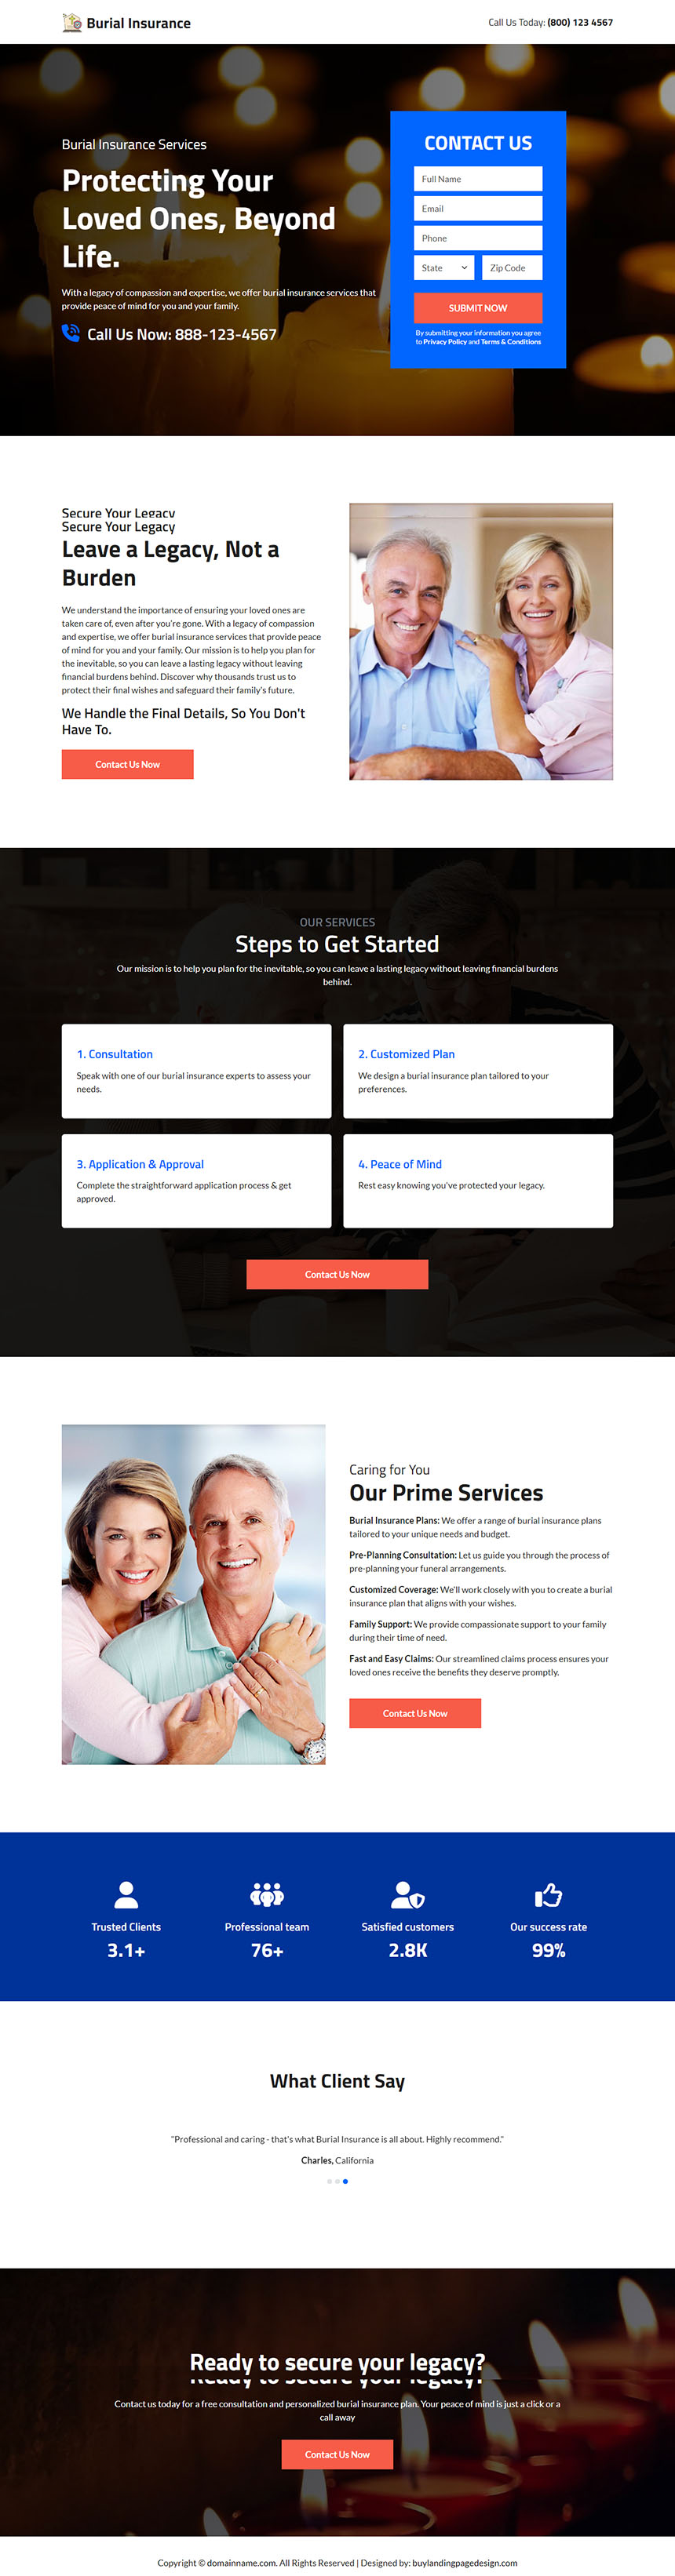 professional burial insurance plans landing page